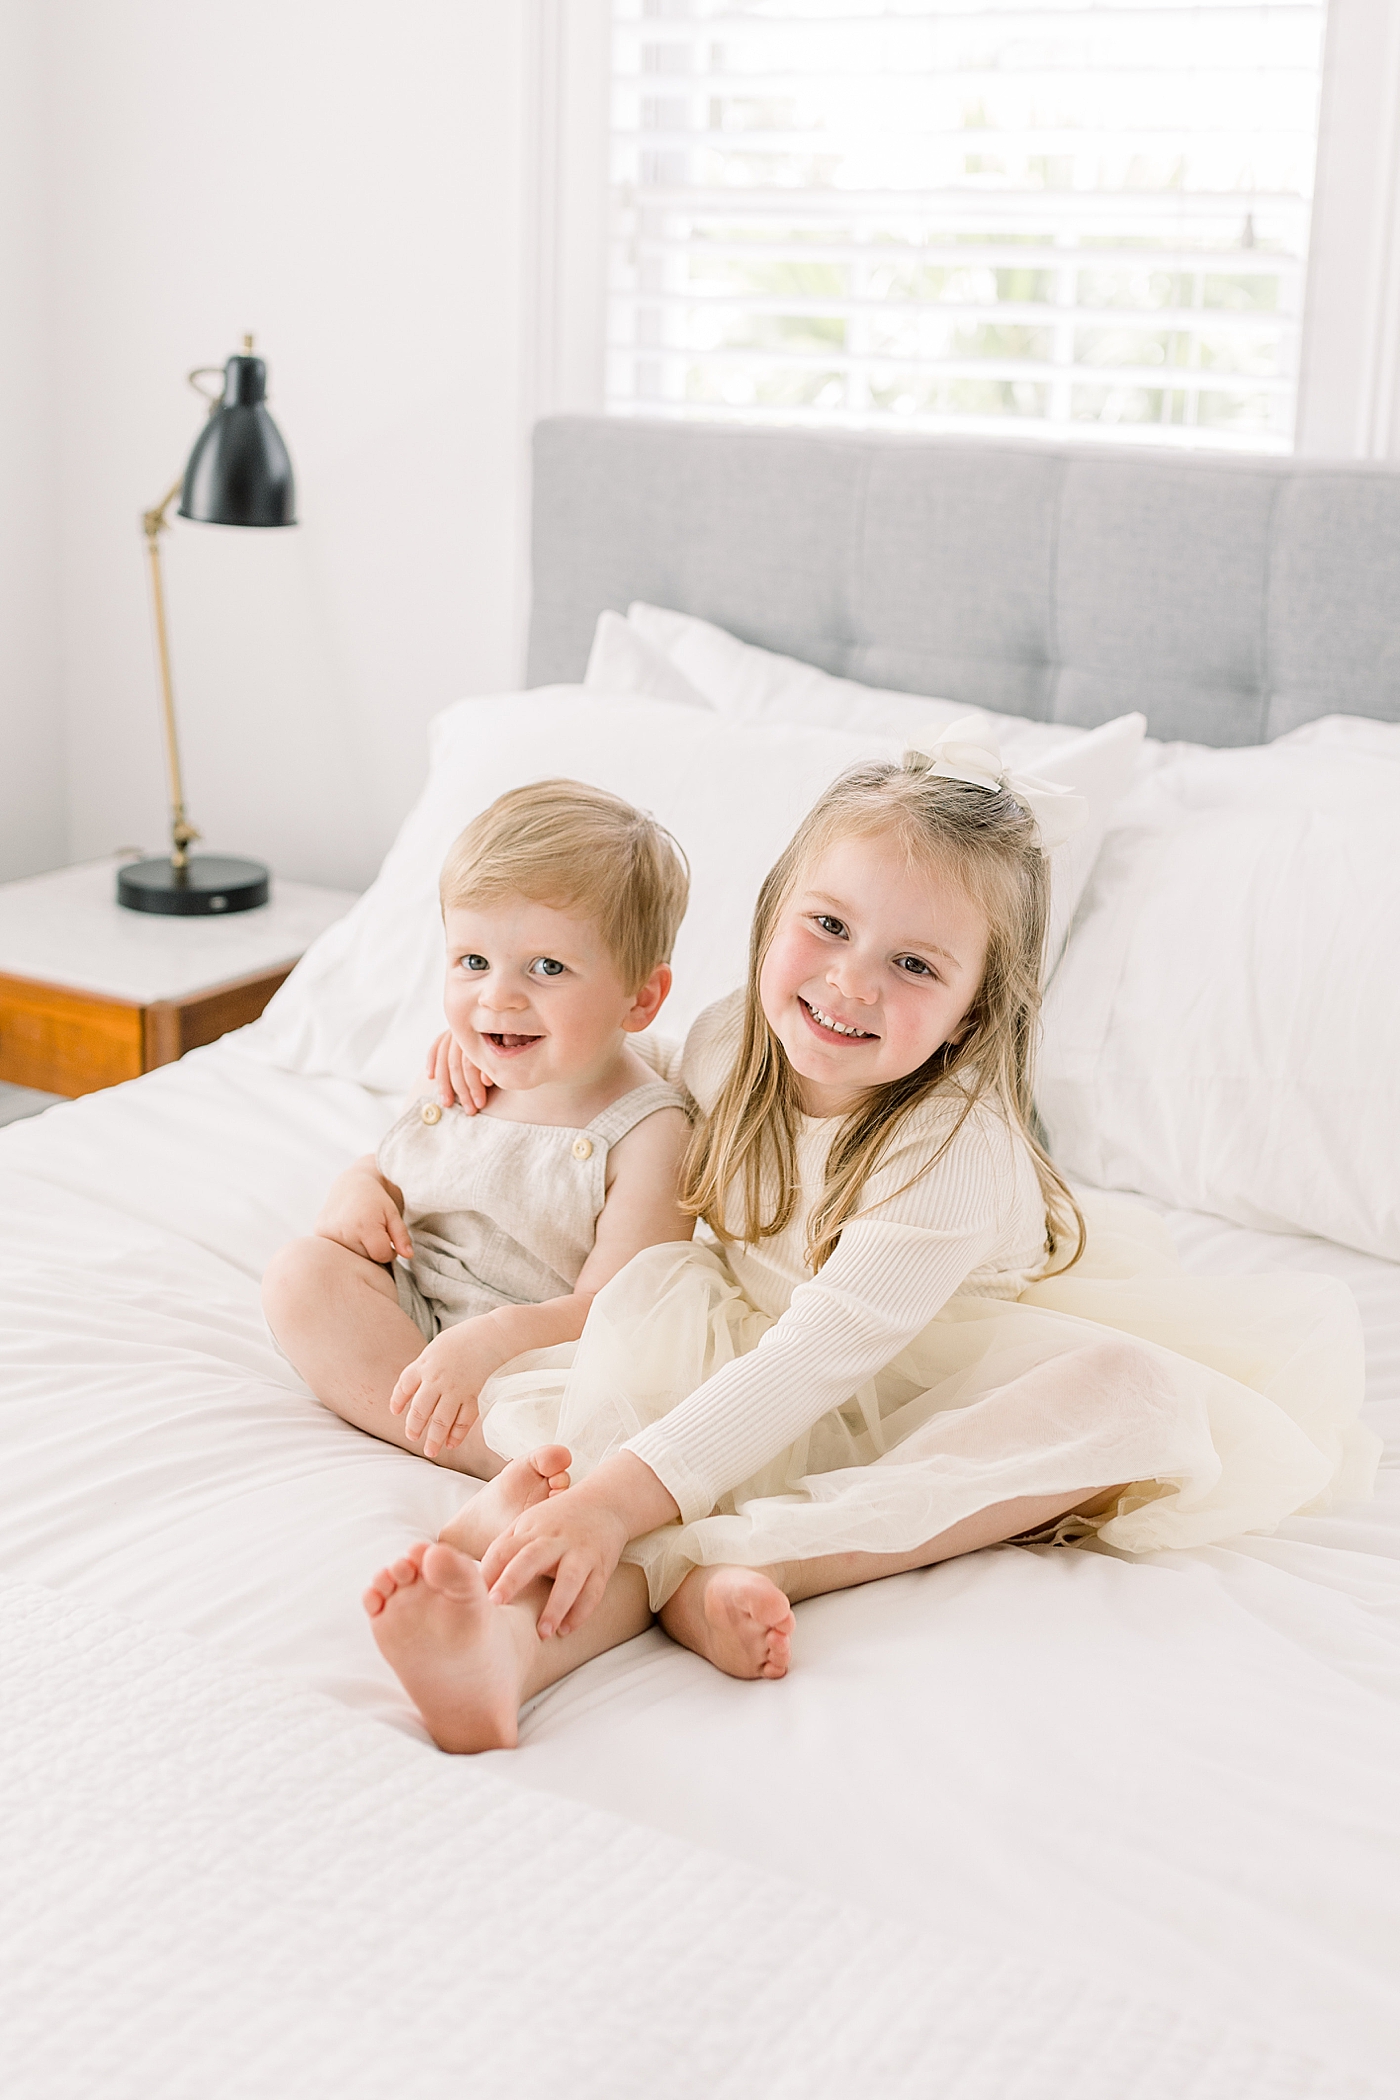 Young girl with her arm around her little brother sitting bed, smiling and looking at the camera | Image by Caitlyn Motycka 